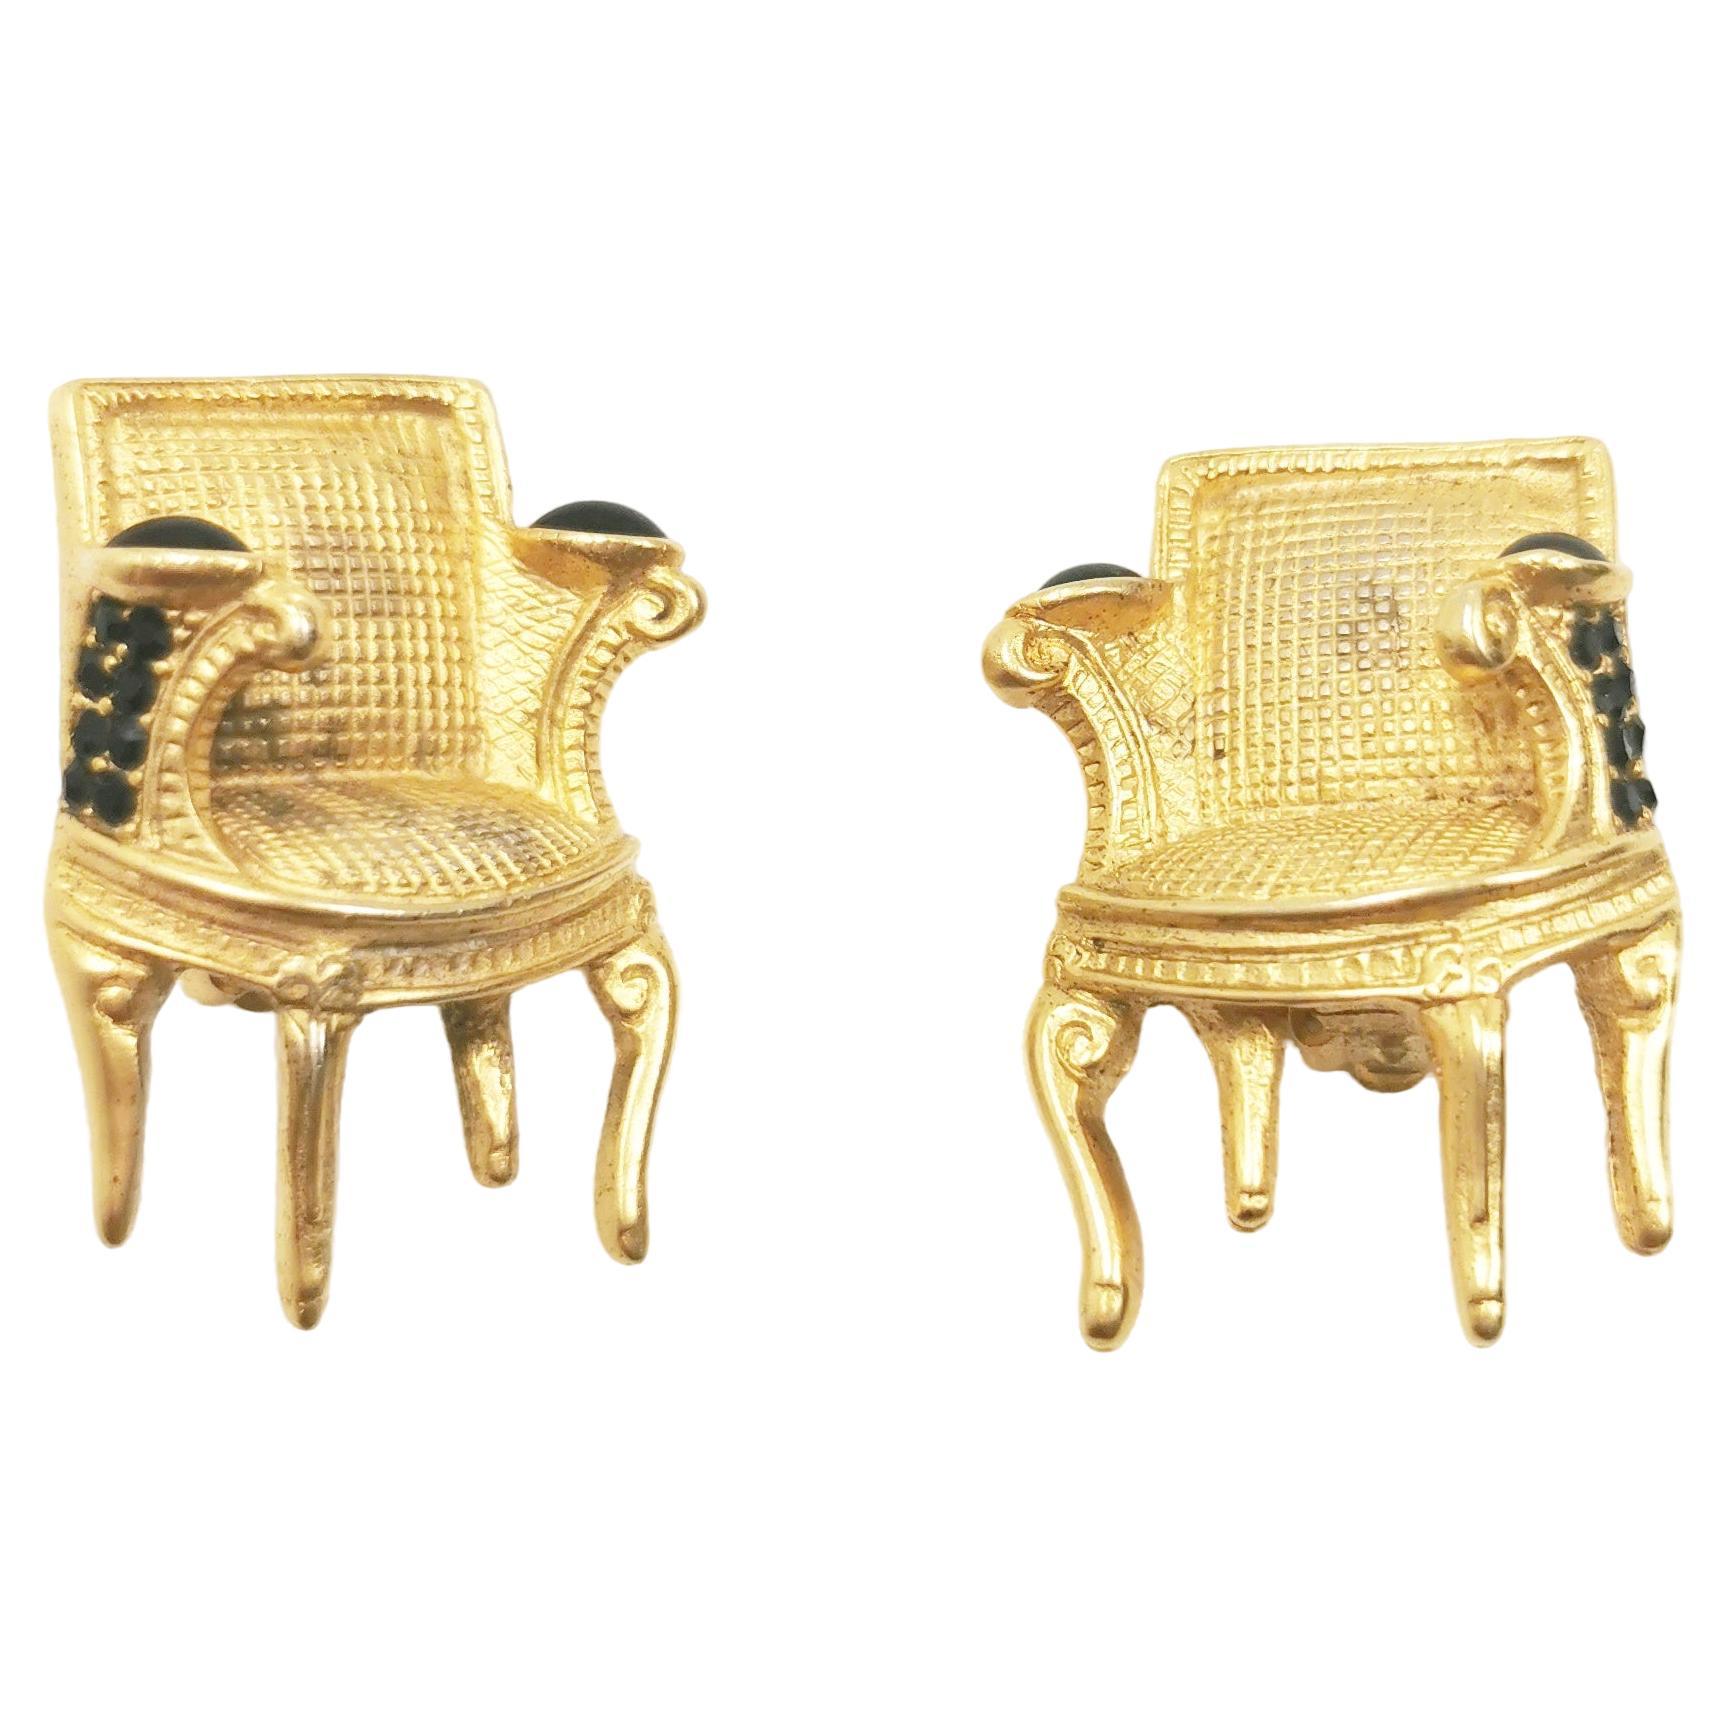 Gilded Bergère Chairs ROCOCO LOUIS XVI GOLD Chair Earrings by Karl Lagerfeld